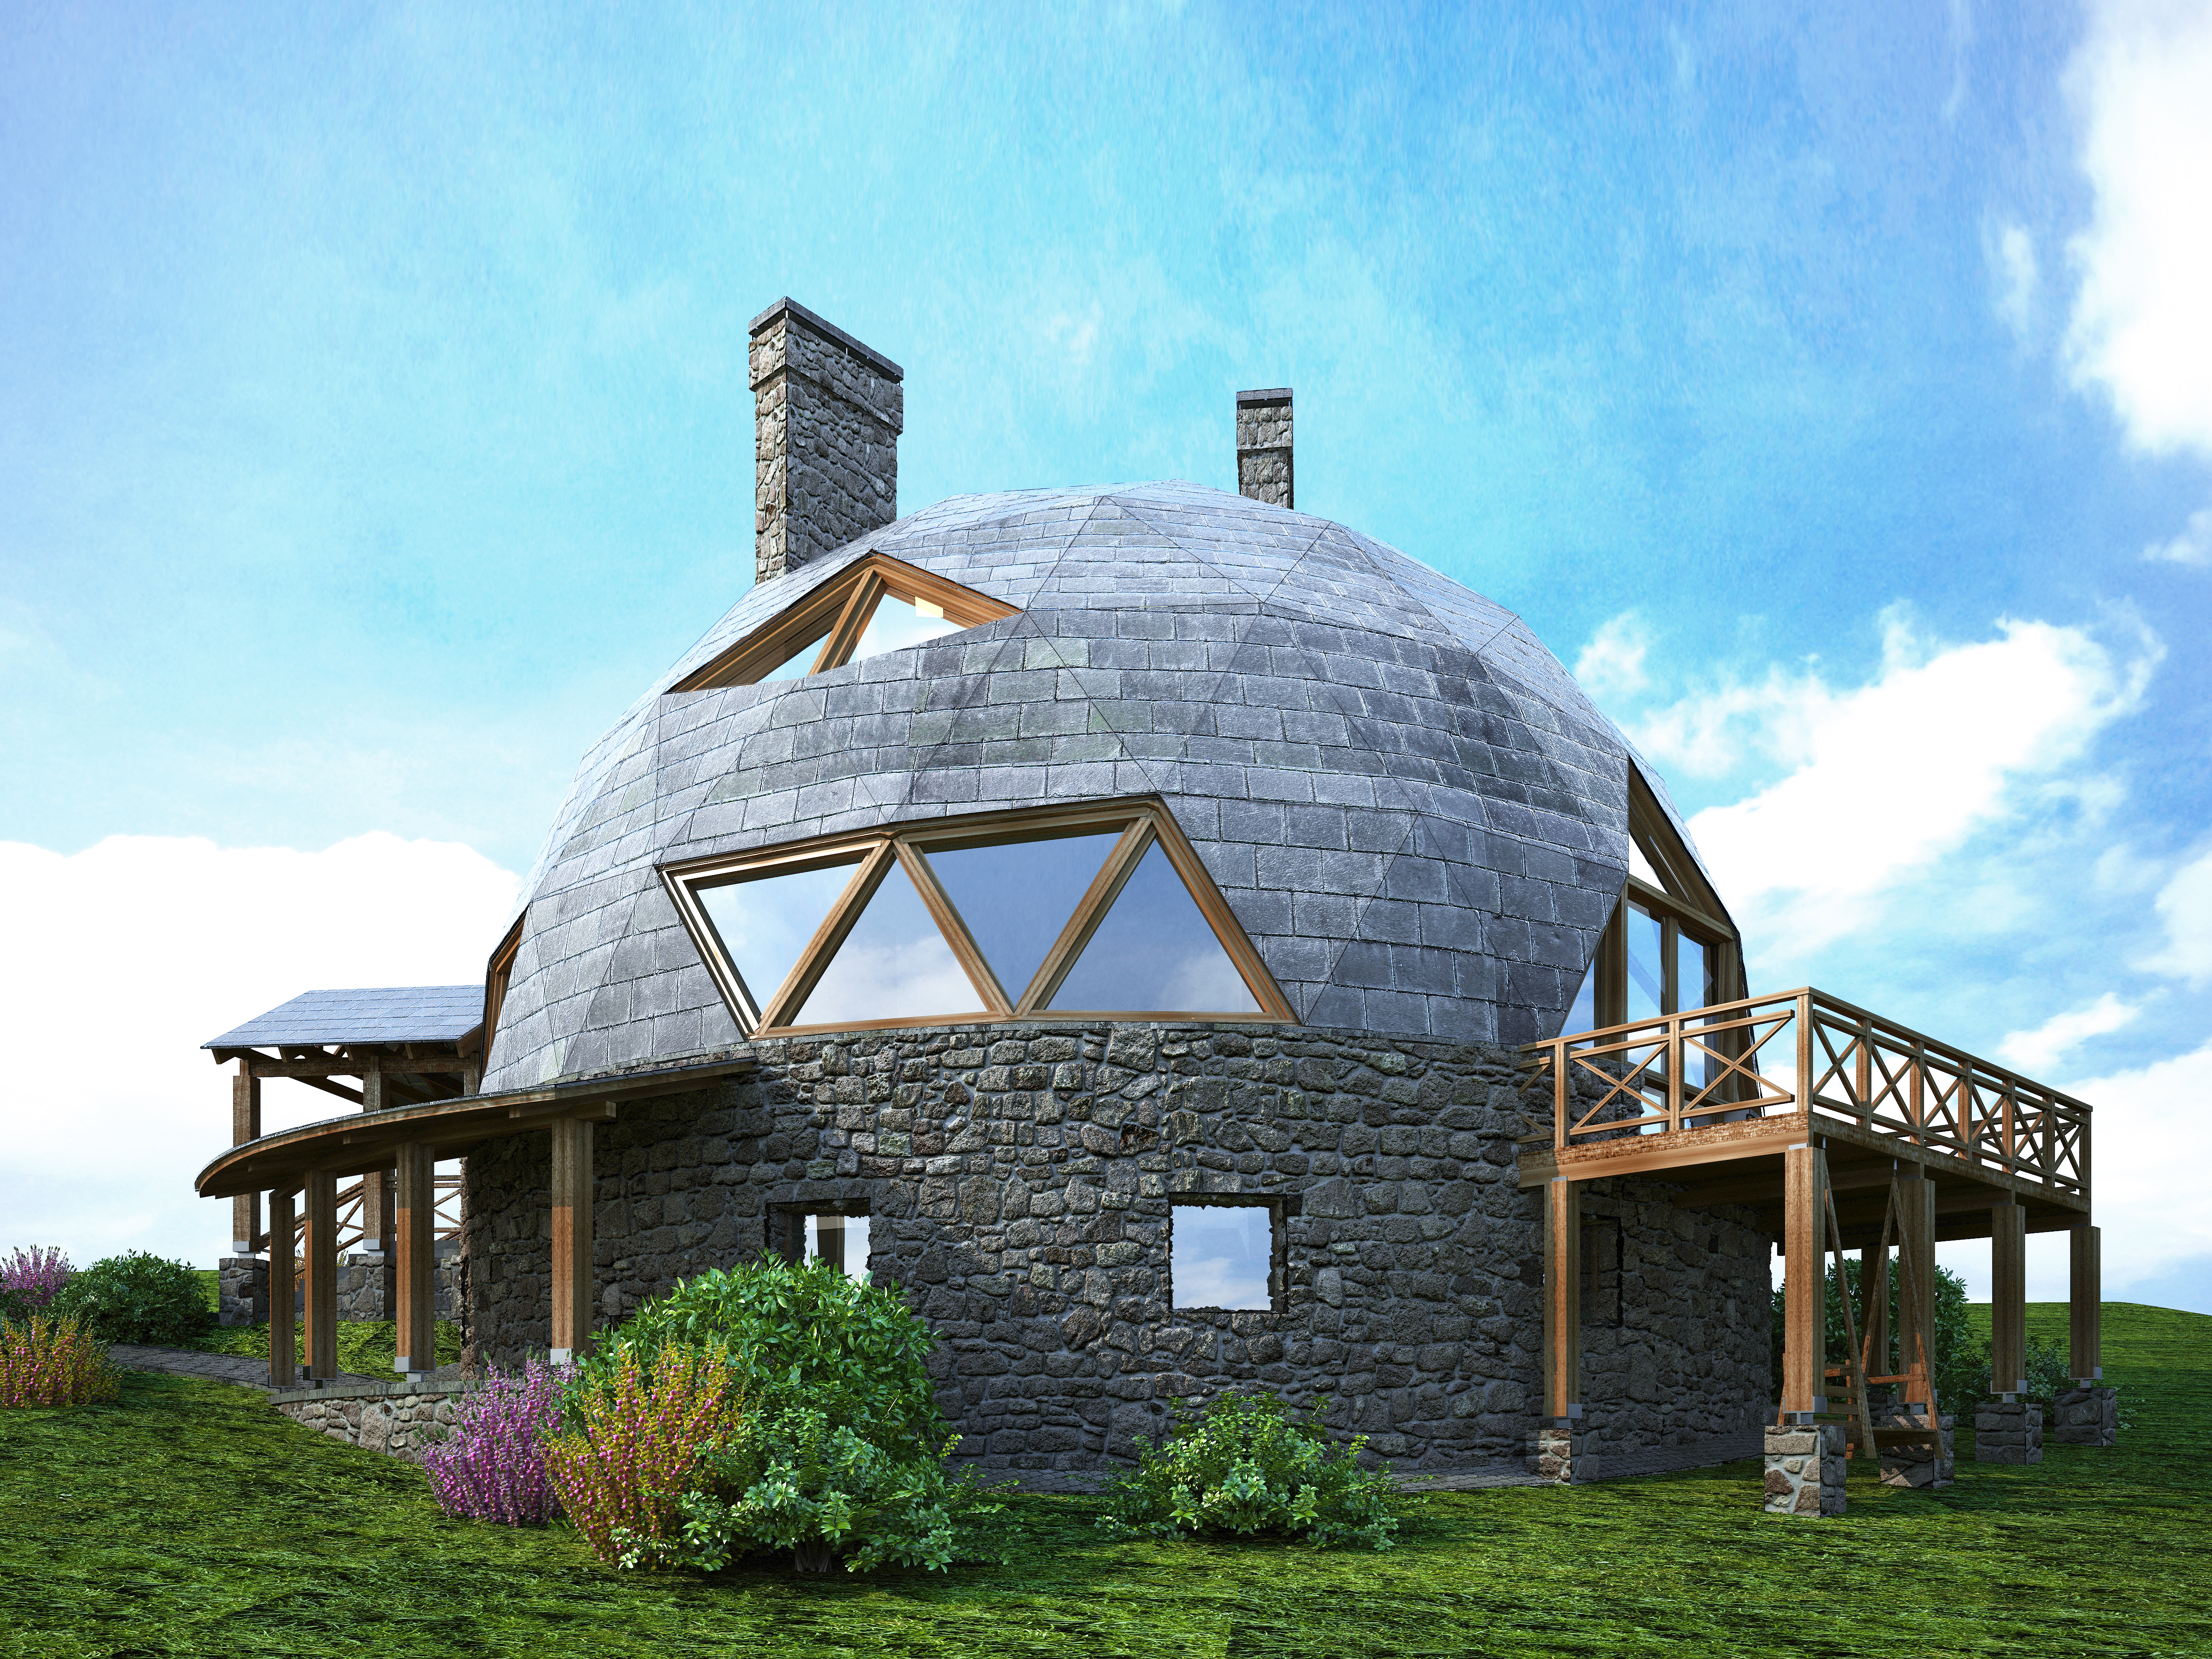 – GeoDome – The Pros and Cons of Geodesic Dome Homes